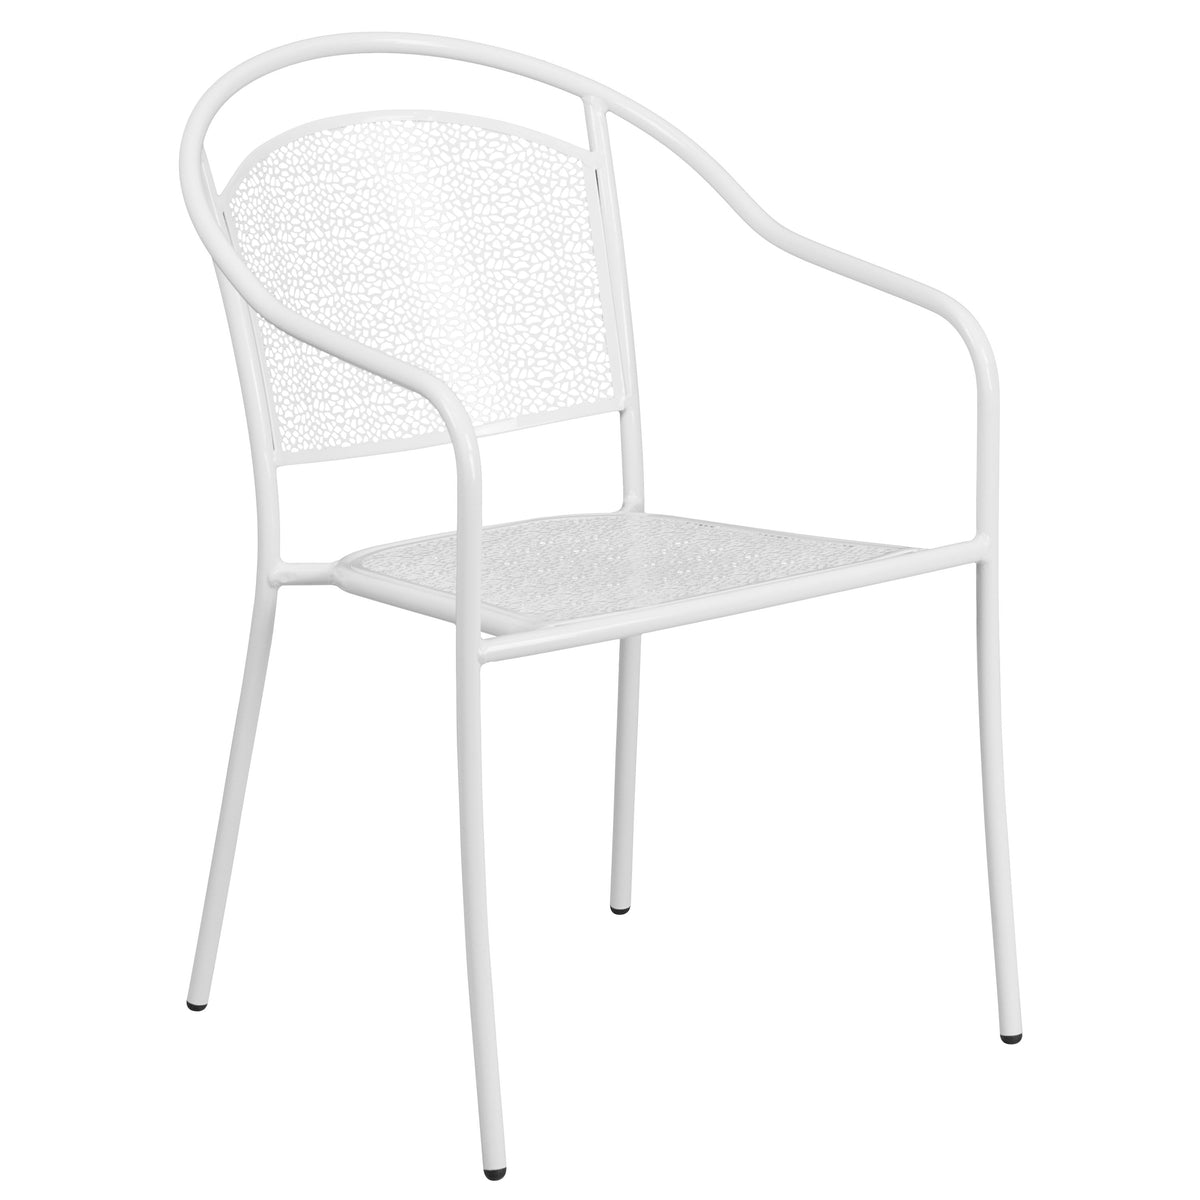 White |#| 30inch Round White Indoor-Outdoor Steel Folding Patio Table Set with 2 Chairs